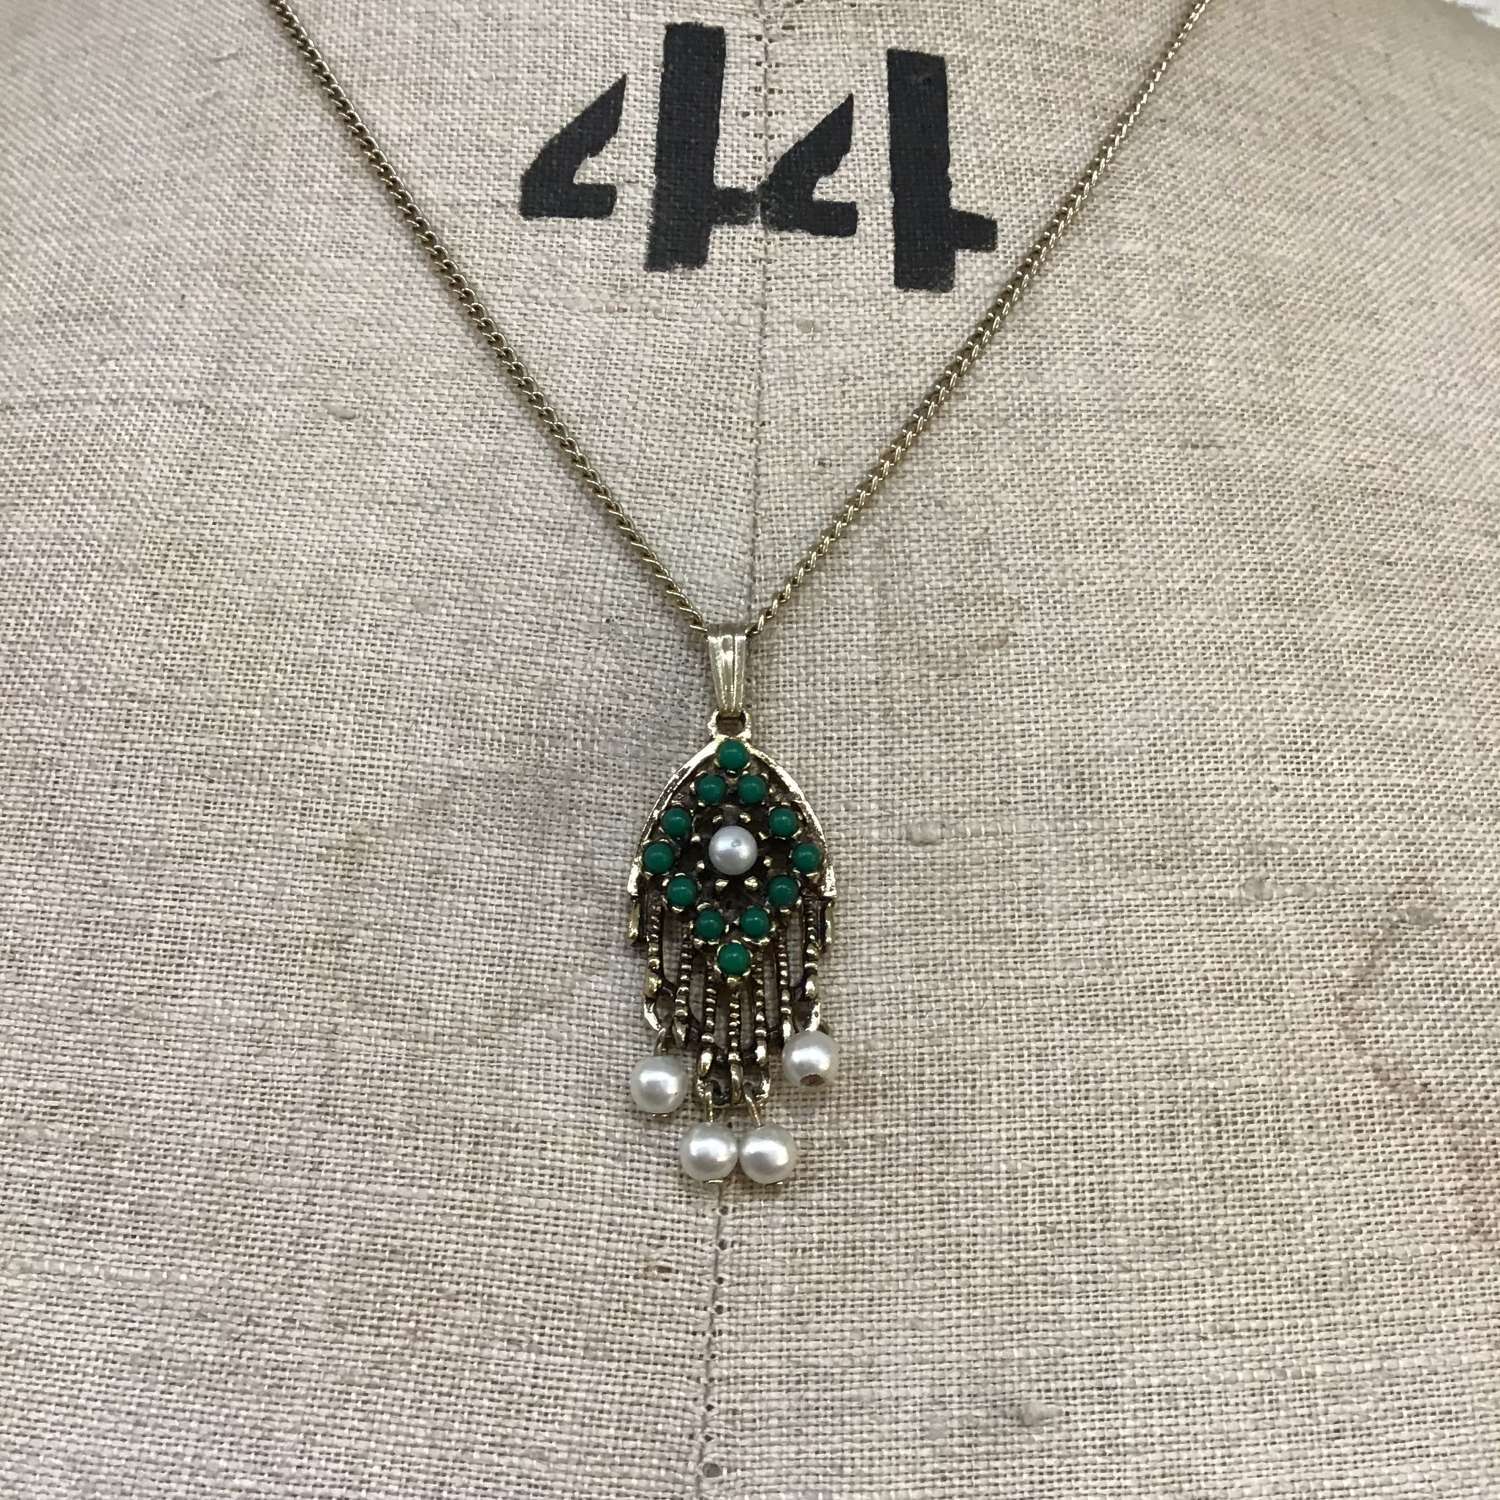 Vintage 1951 Sarah Coventry necklace with green stones and pearl beads